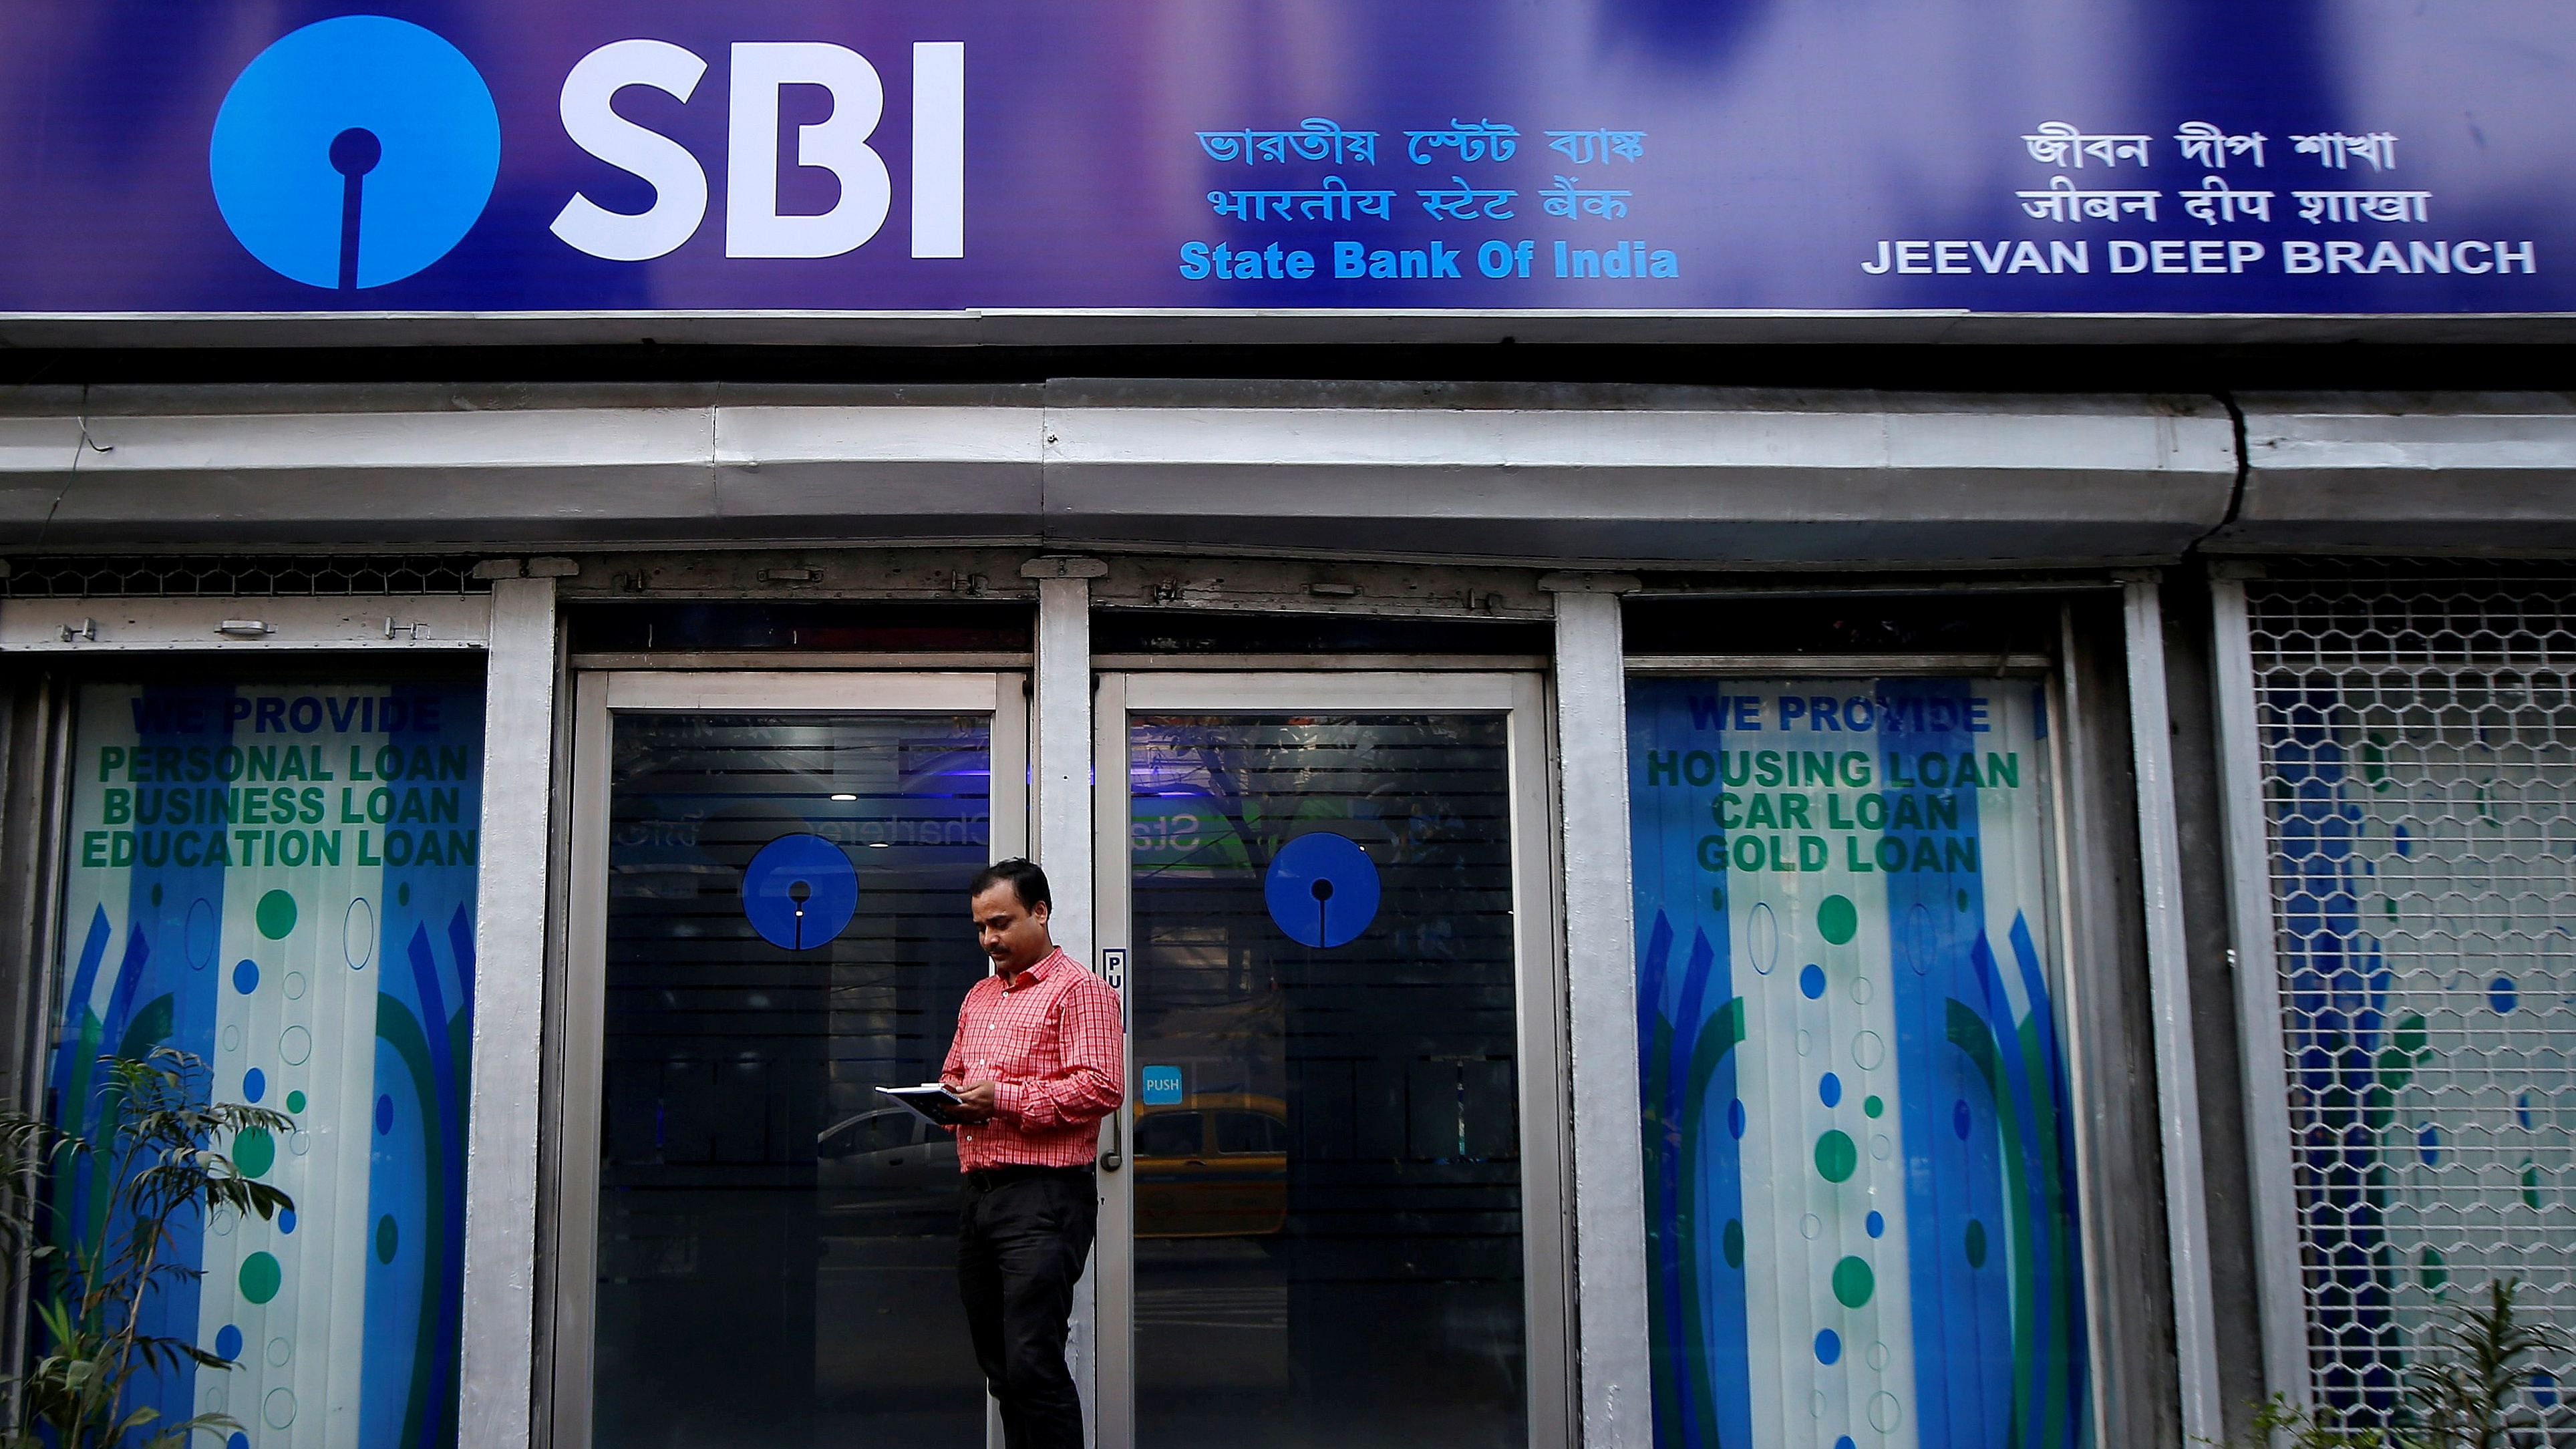 SBI shares, which had risen about 40% this year by last close, pared some gains after the results, and were last up 0.8%. Credit: Reuters File Photo